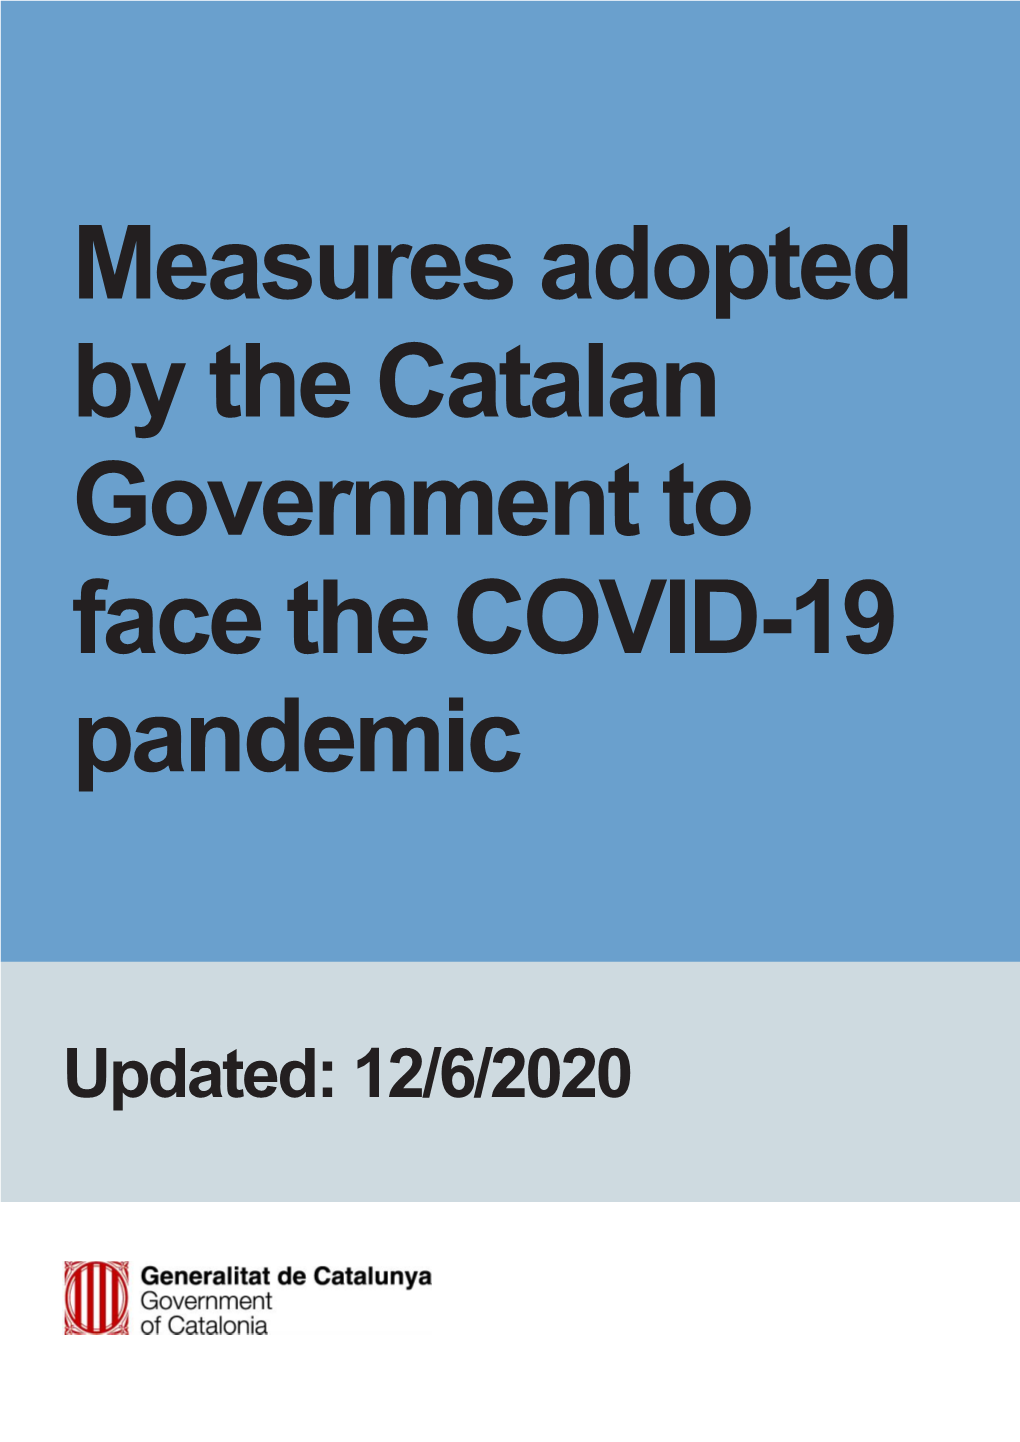 Measures Adopted by the Catalan Government to Face the COVID-19 Pandemic